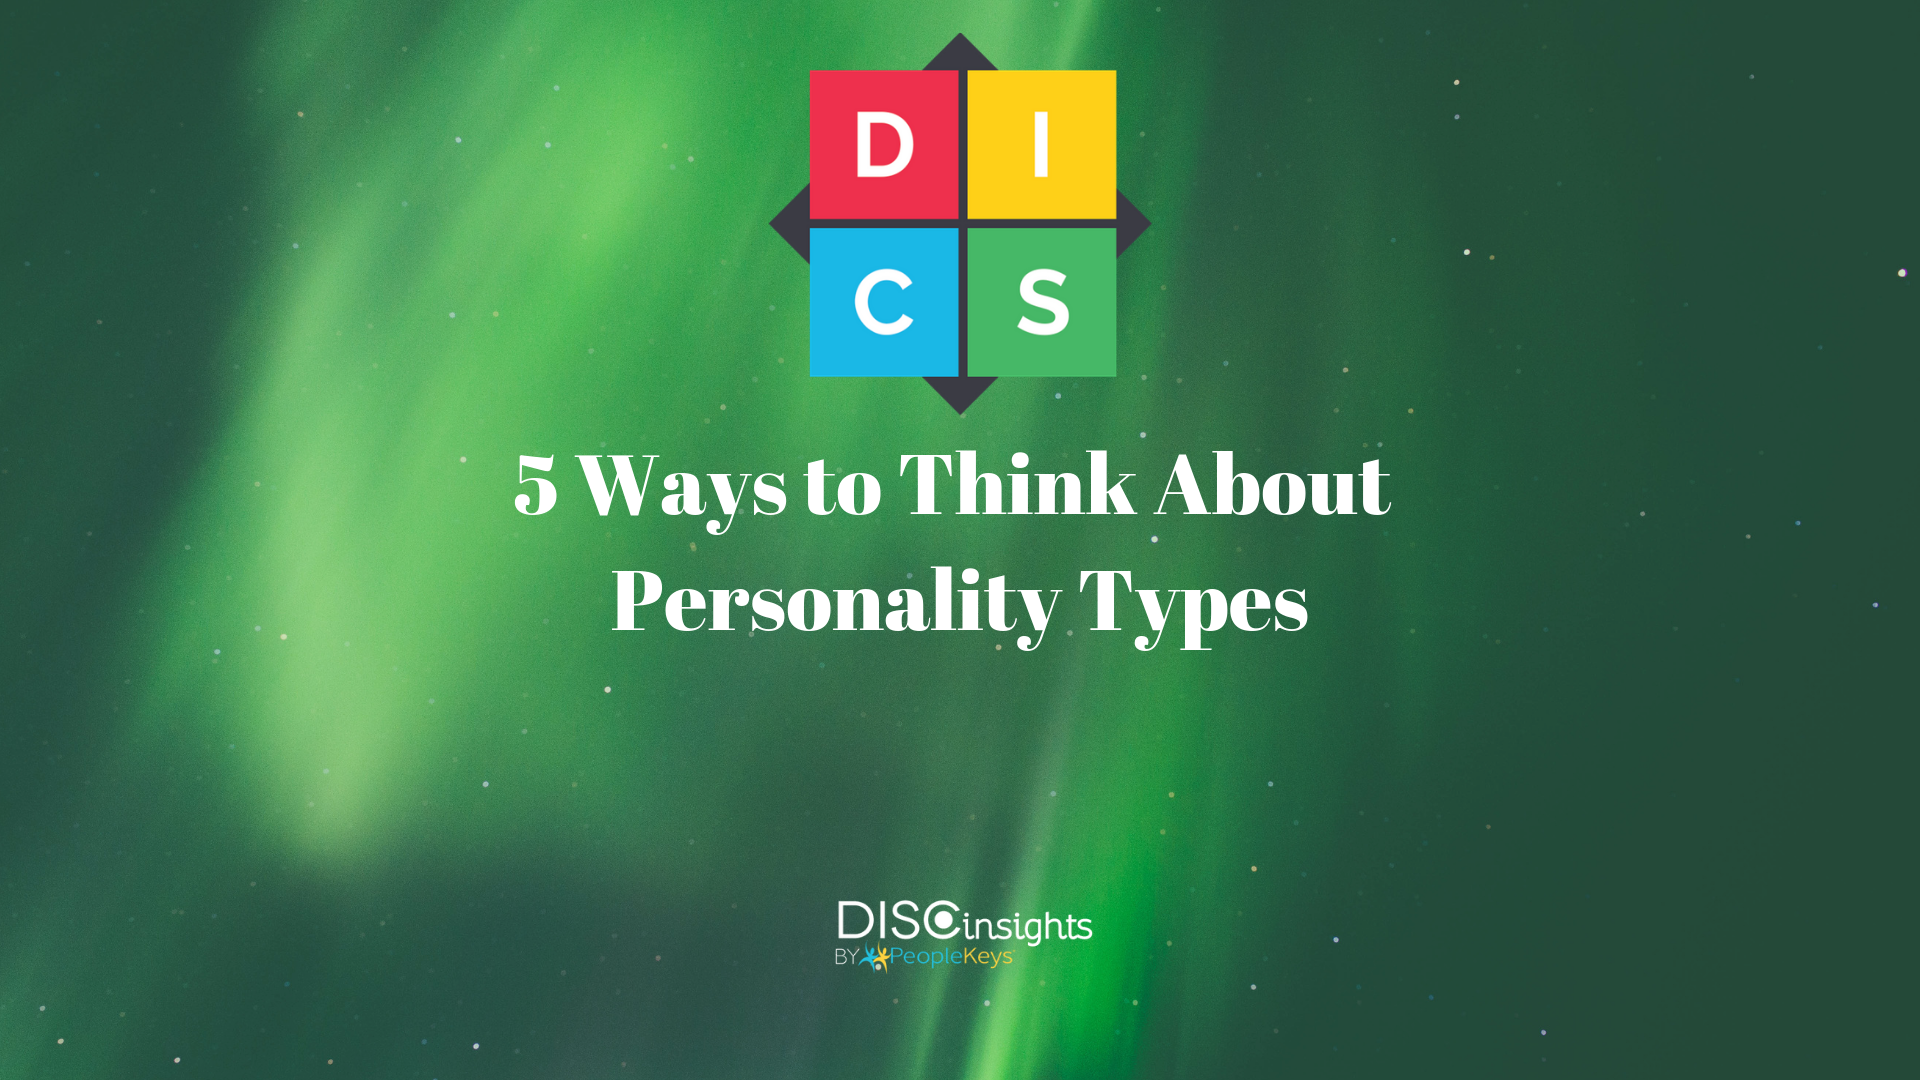 5 Ways to Think About Personality Types